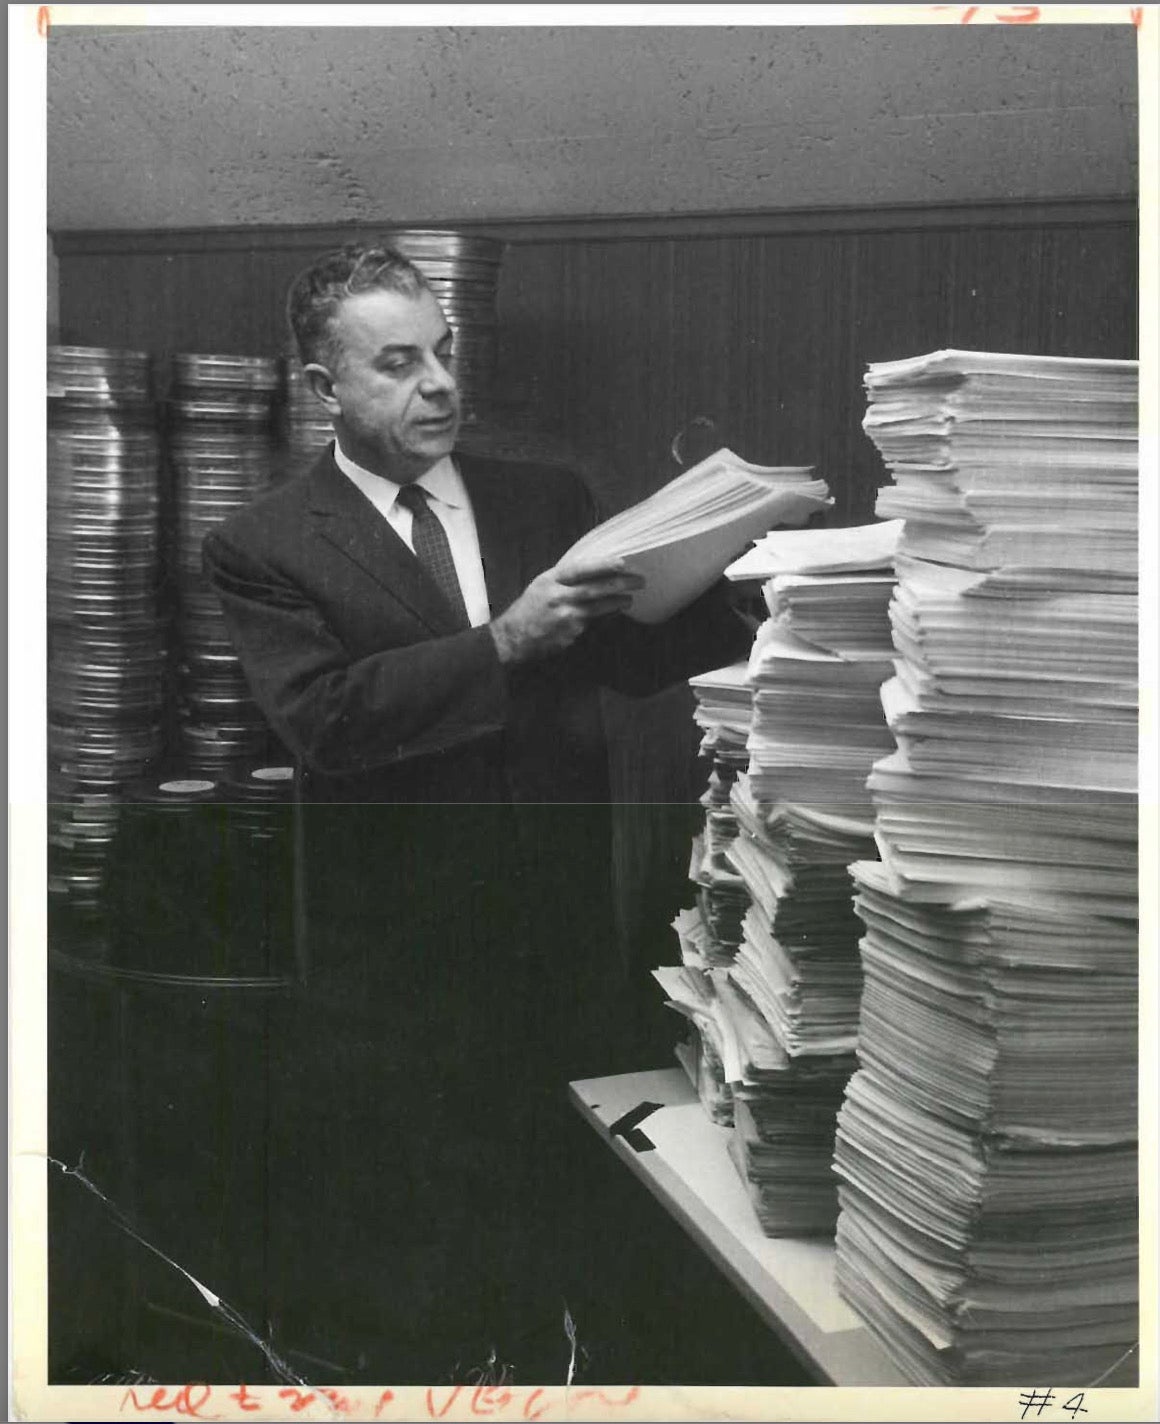 Frank Siedel standing amidst a pile of "The Ohio Story" film reels and scripts